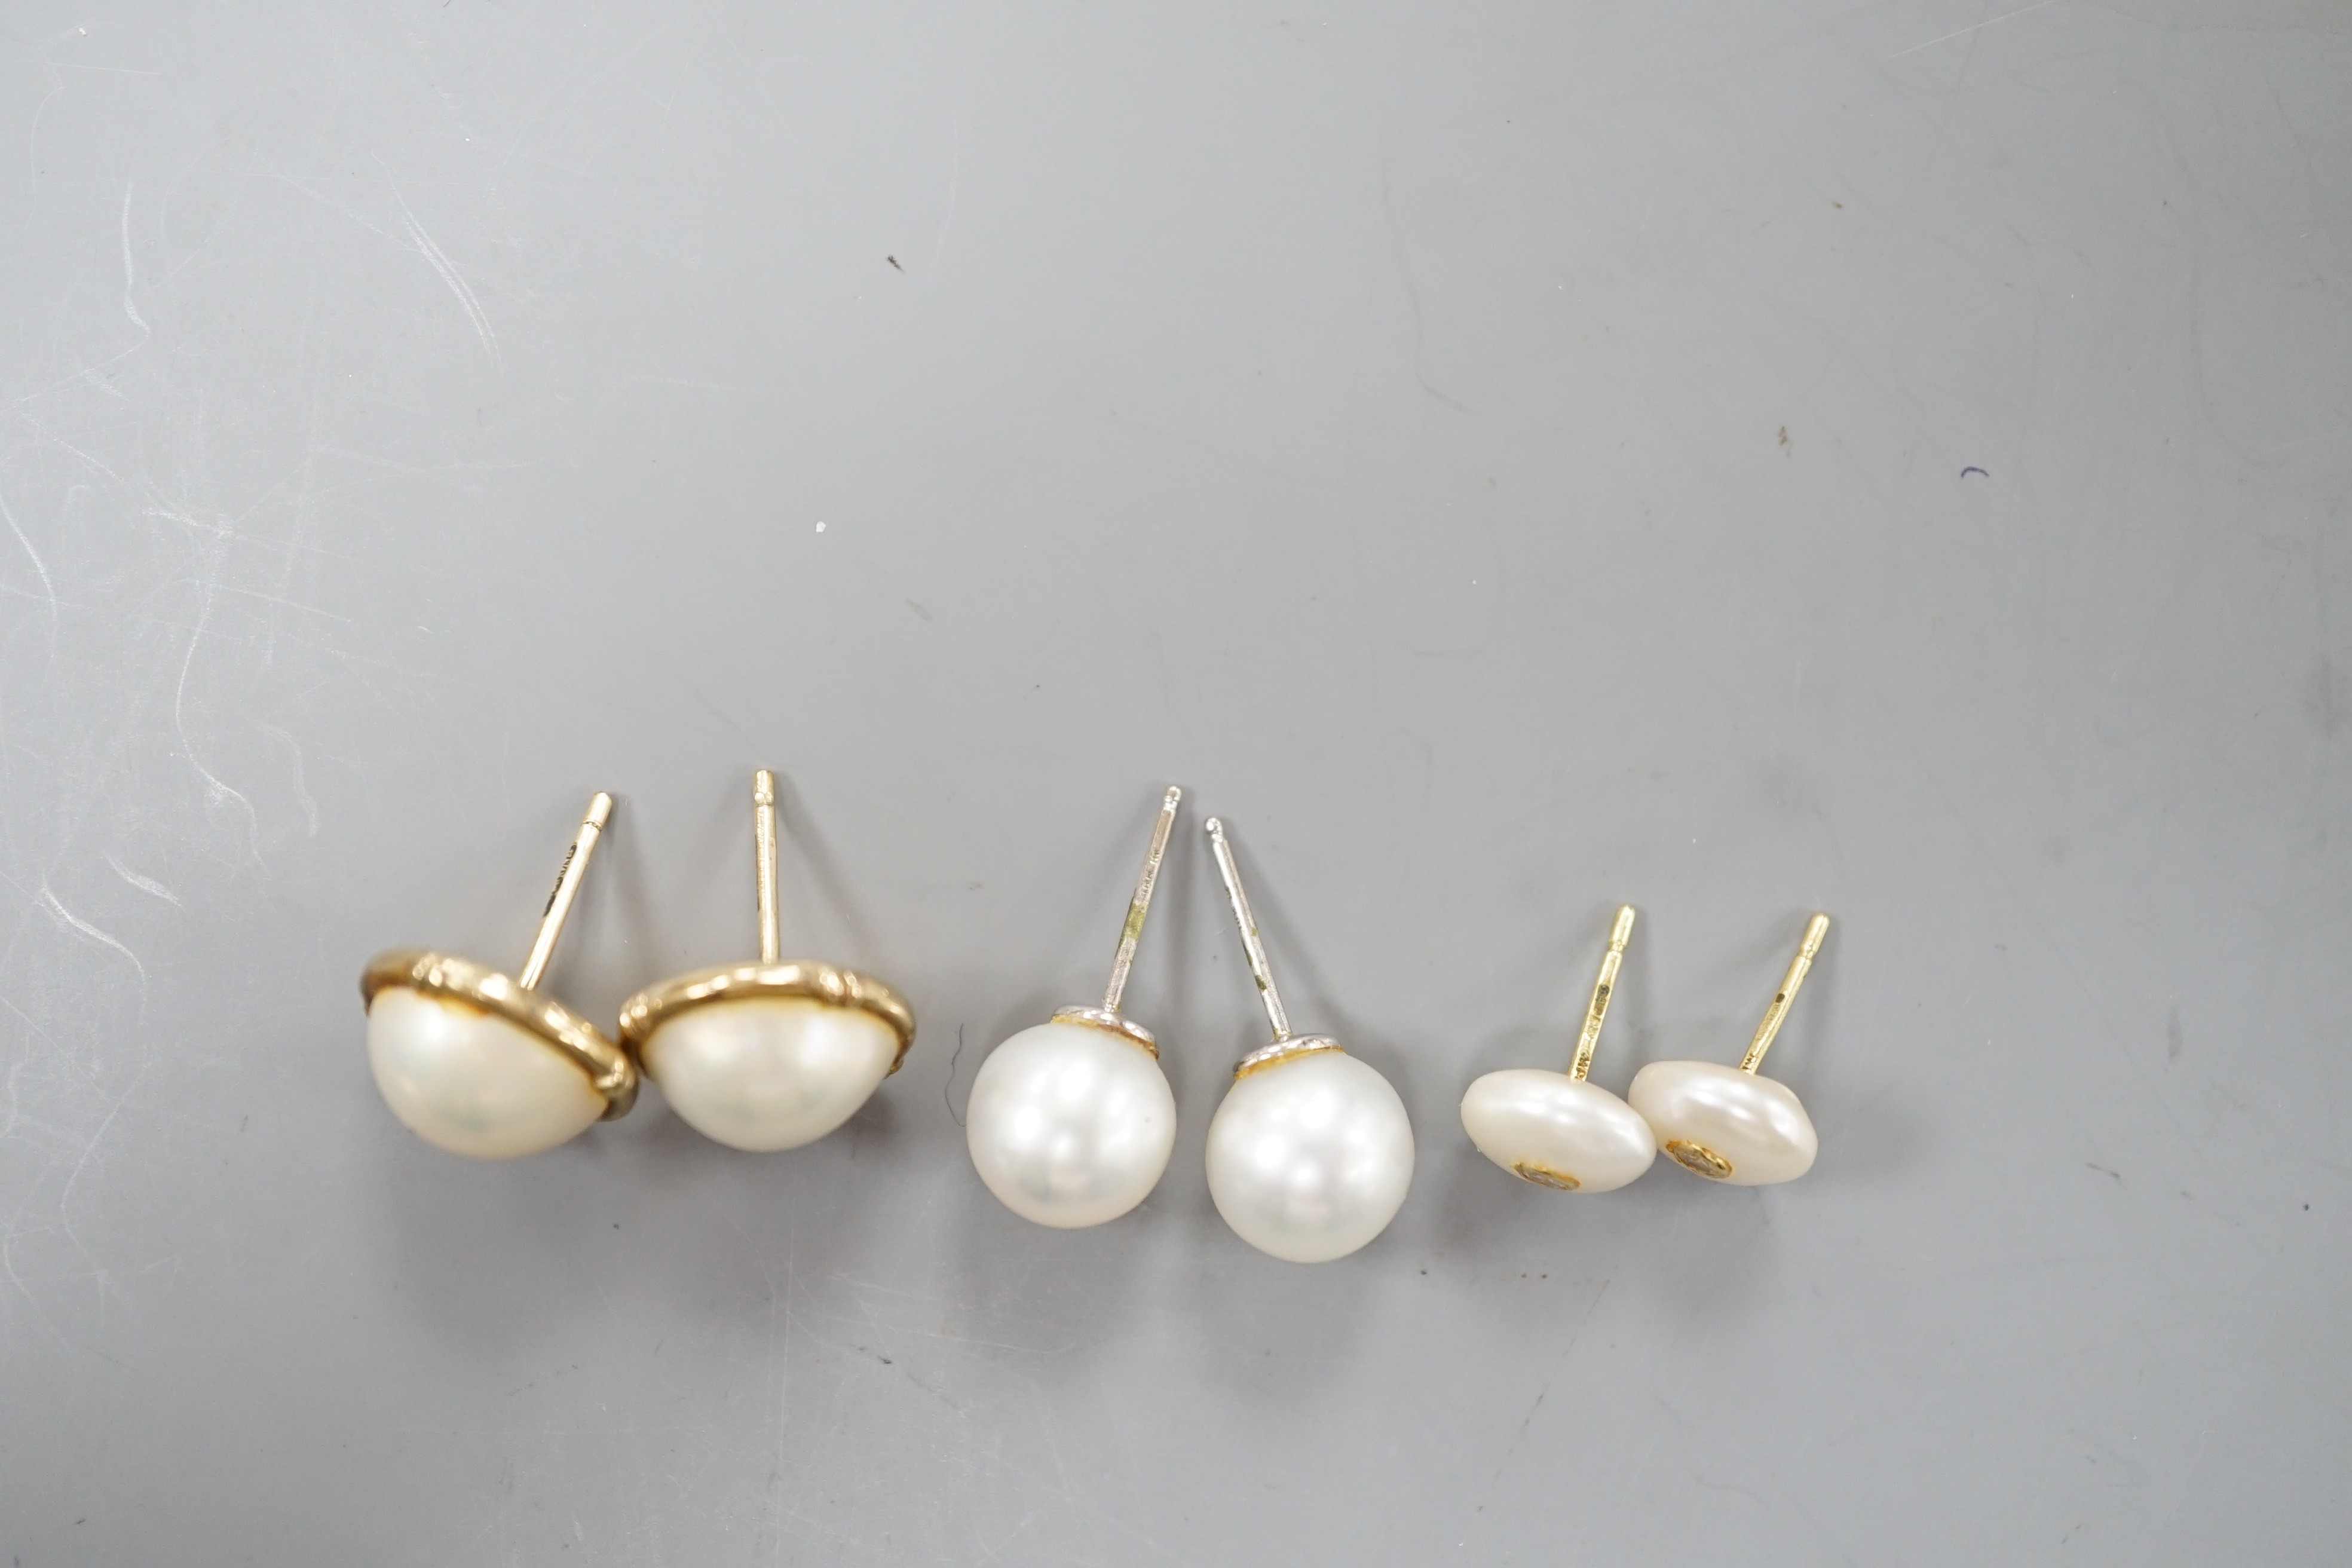 A pair of 18ct and cultured pear ear studs, a pair 9ct gold and mabe pearl ear studs and a pair of 18k, cultured pearl and diamond set ear studs (all lacking butterflies).